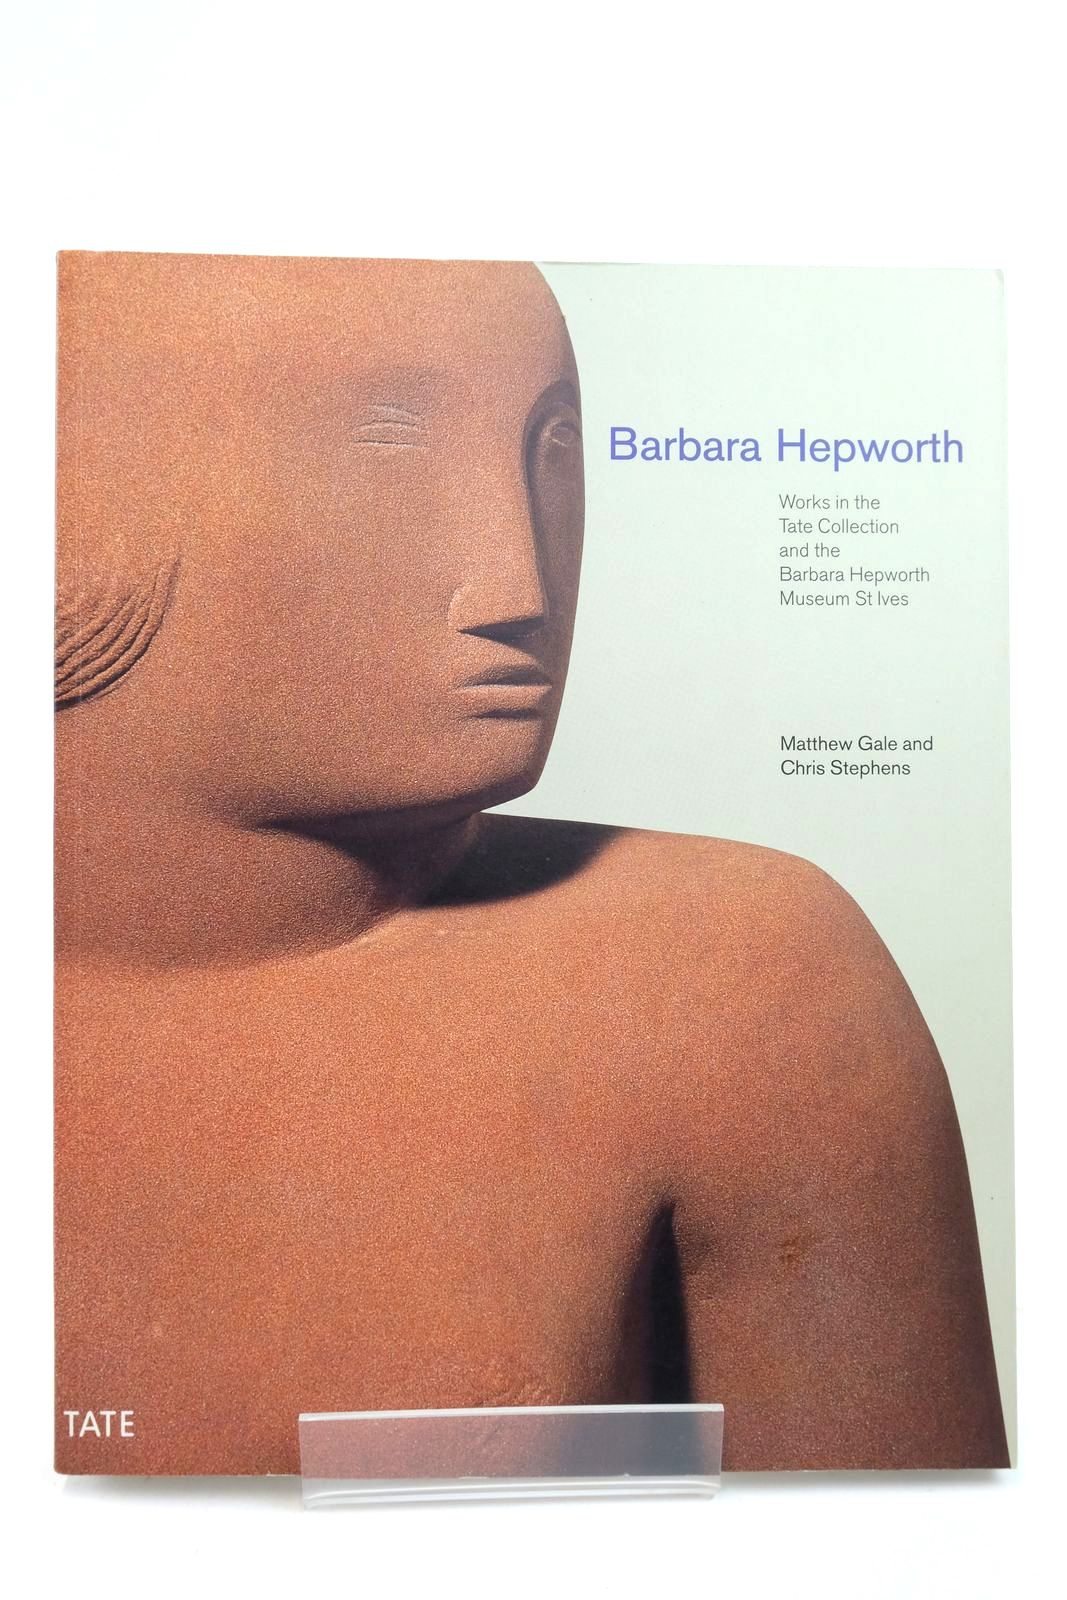 Photo of BARBARA HEPWORTH: WORKS IN THE TATE COLLECTION AND THE BARBARA HEPWORTH MUSEUM ST IVES- Stock Number: 2140814